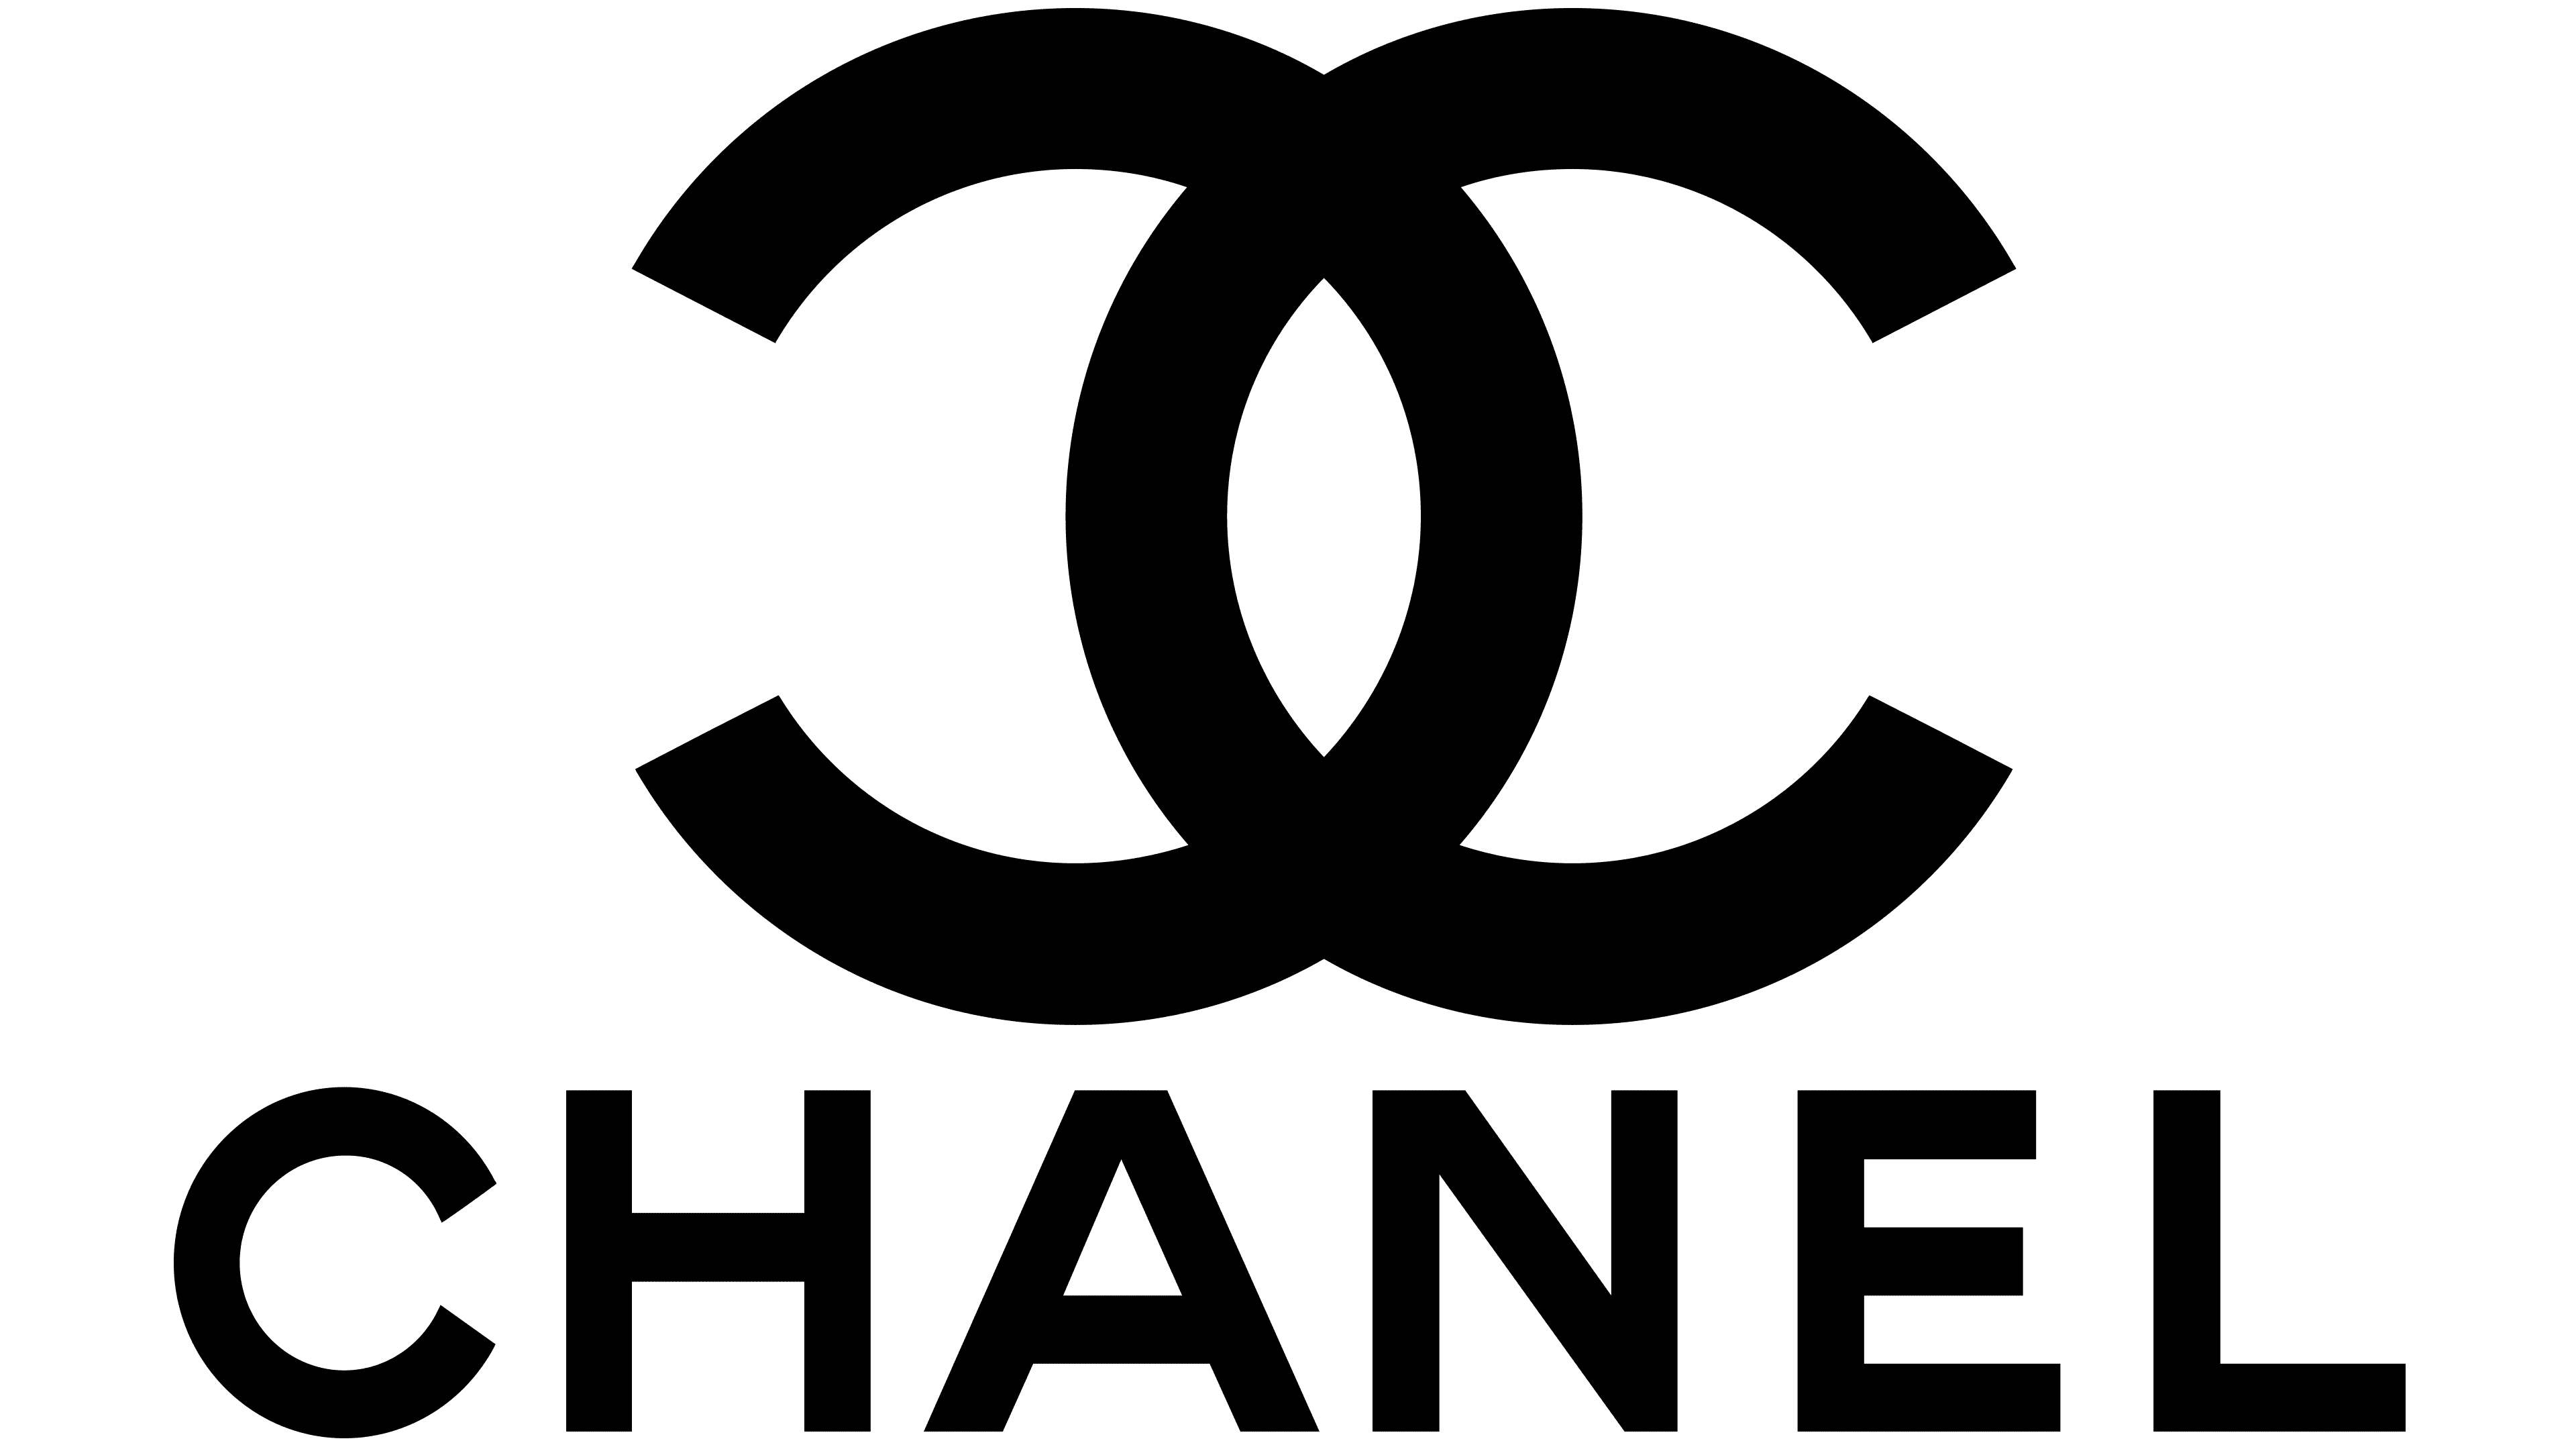 The Chanel logo The Chanel logo was created in 1925 by  by Jennifer  Whitehead  FGD1 The Archive  Medium